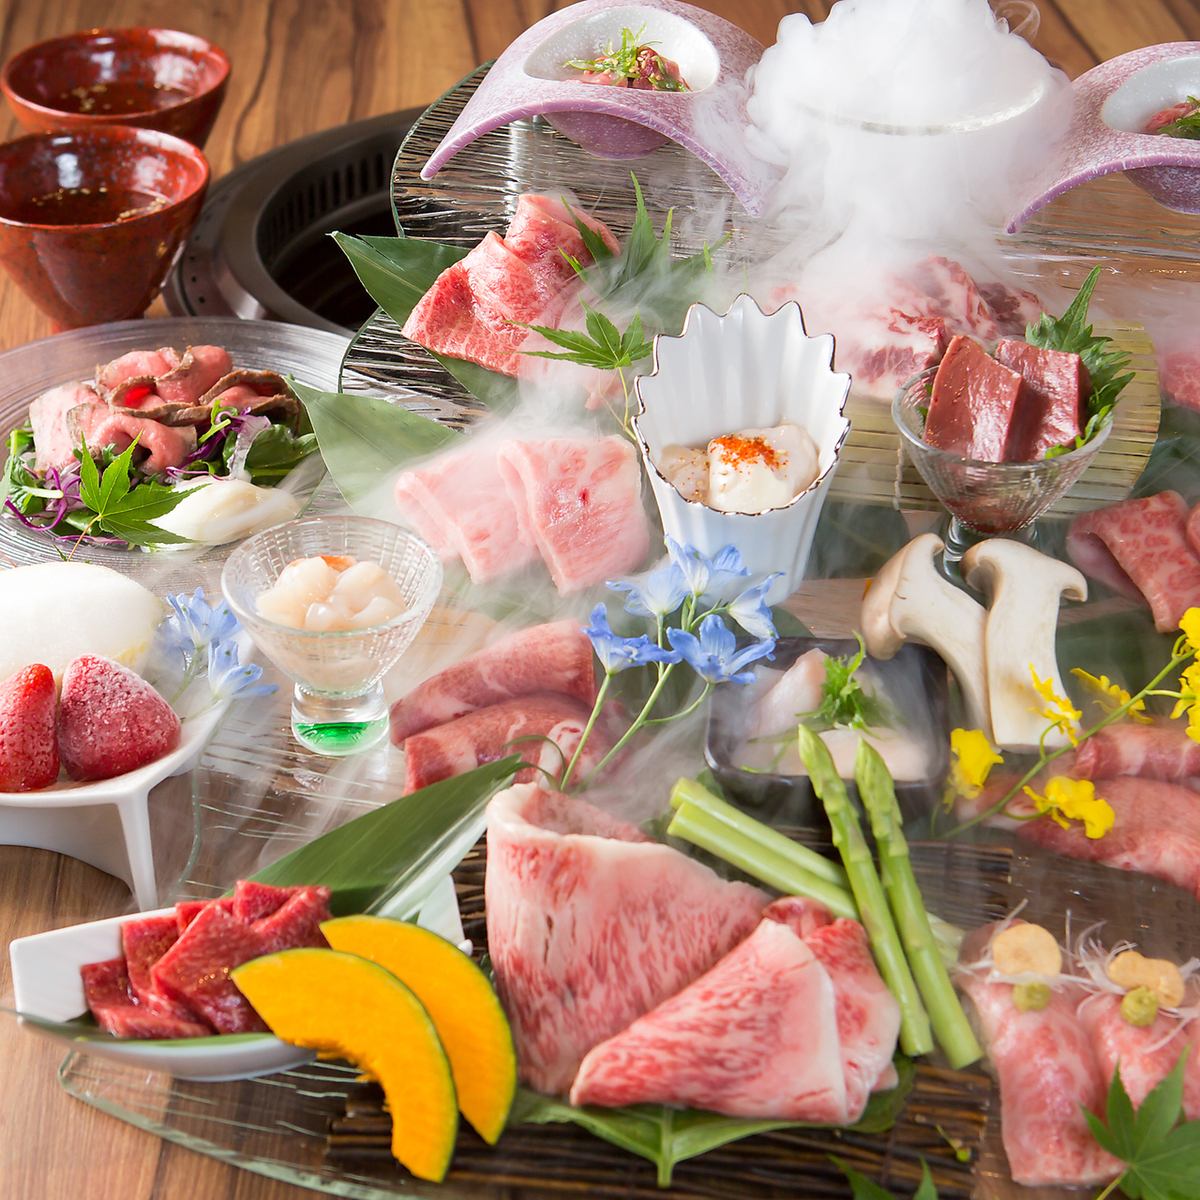 《...Fascinating meat dishes made by Japanese chefs...》 ``Nikuryori Yakiniku Yushokuan'' is a yakiniku restaurant with completely private rooms for all seats.